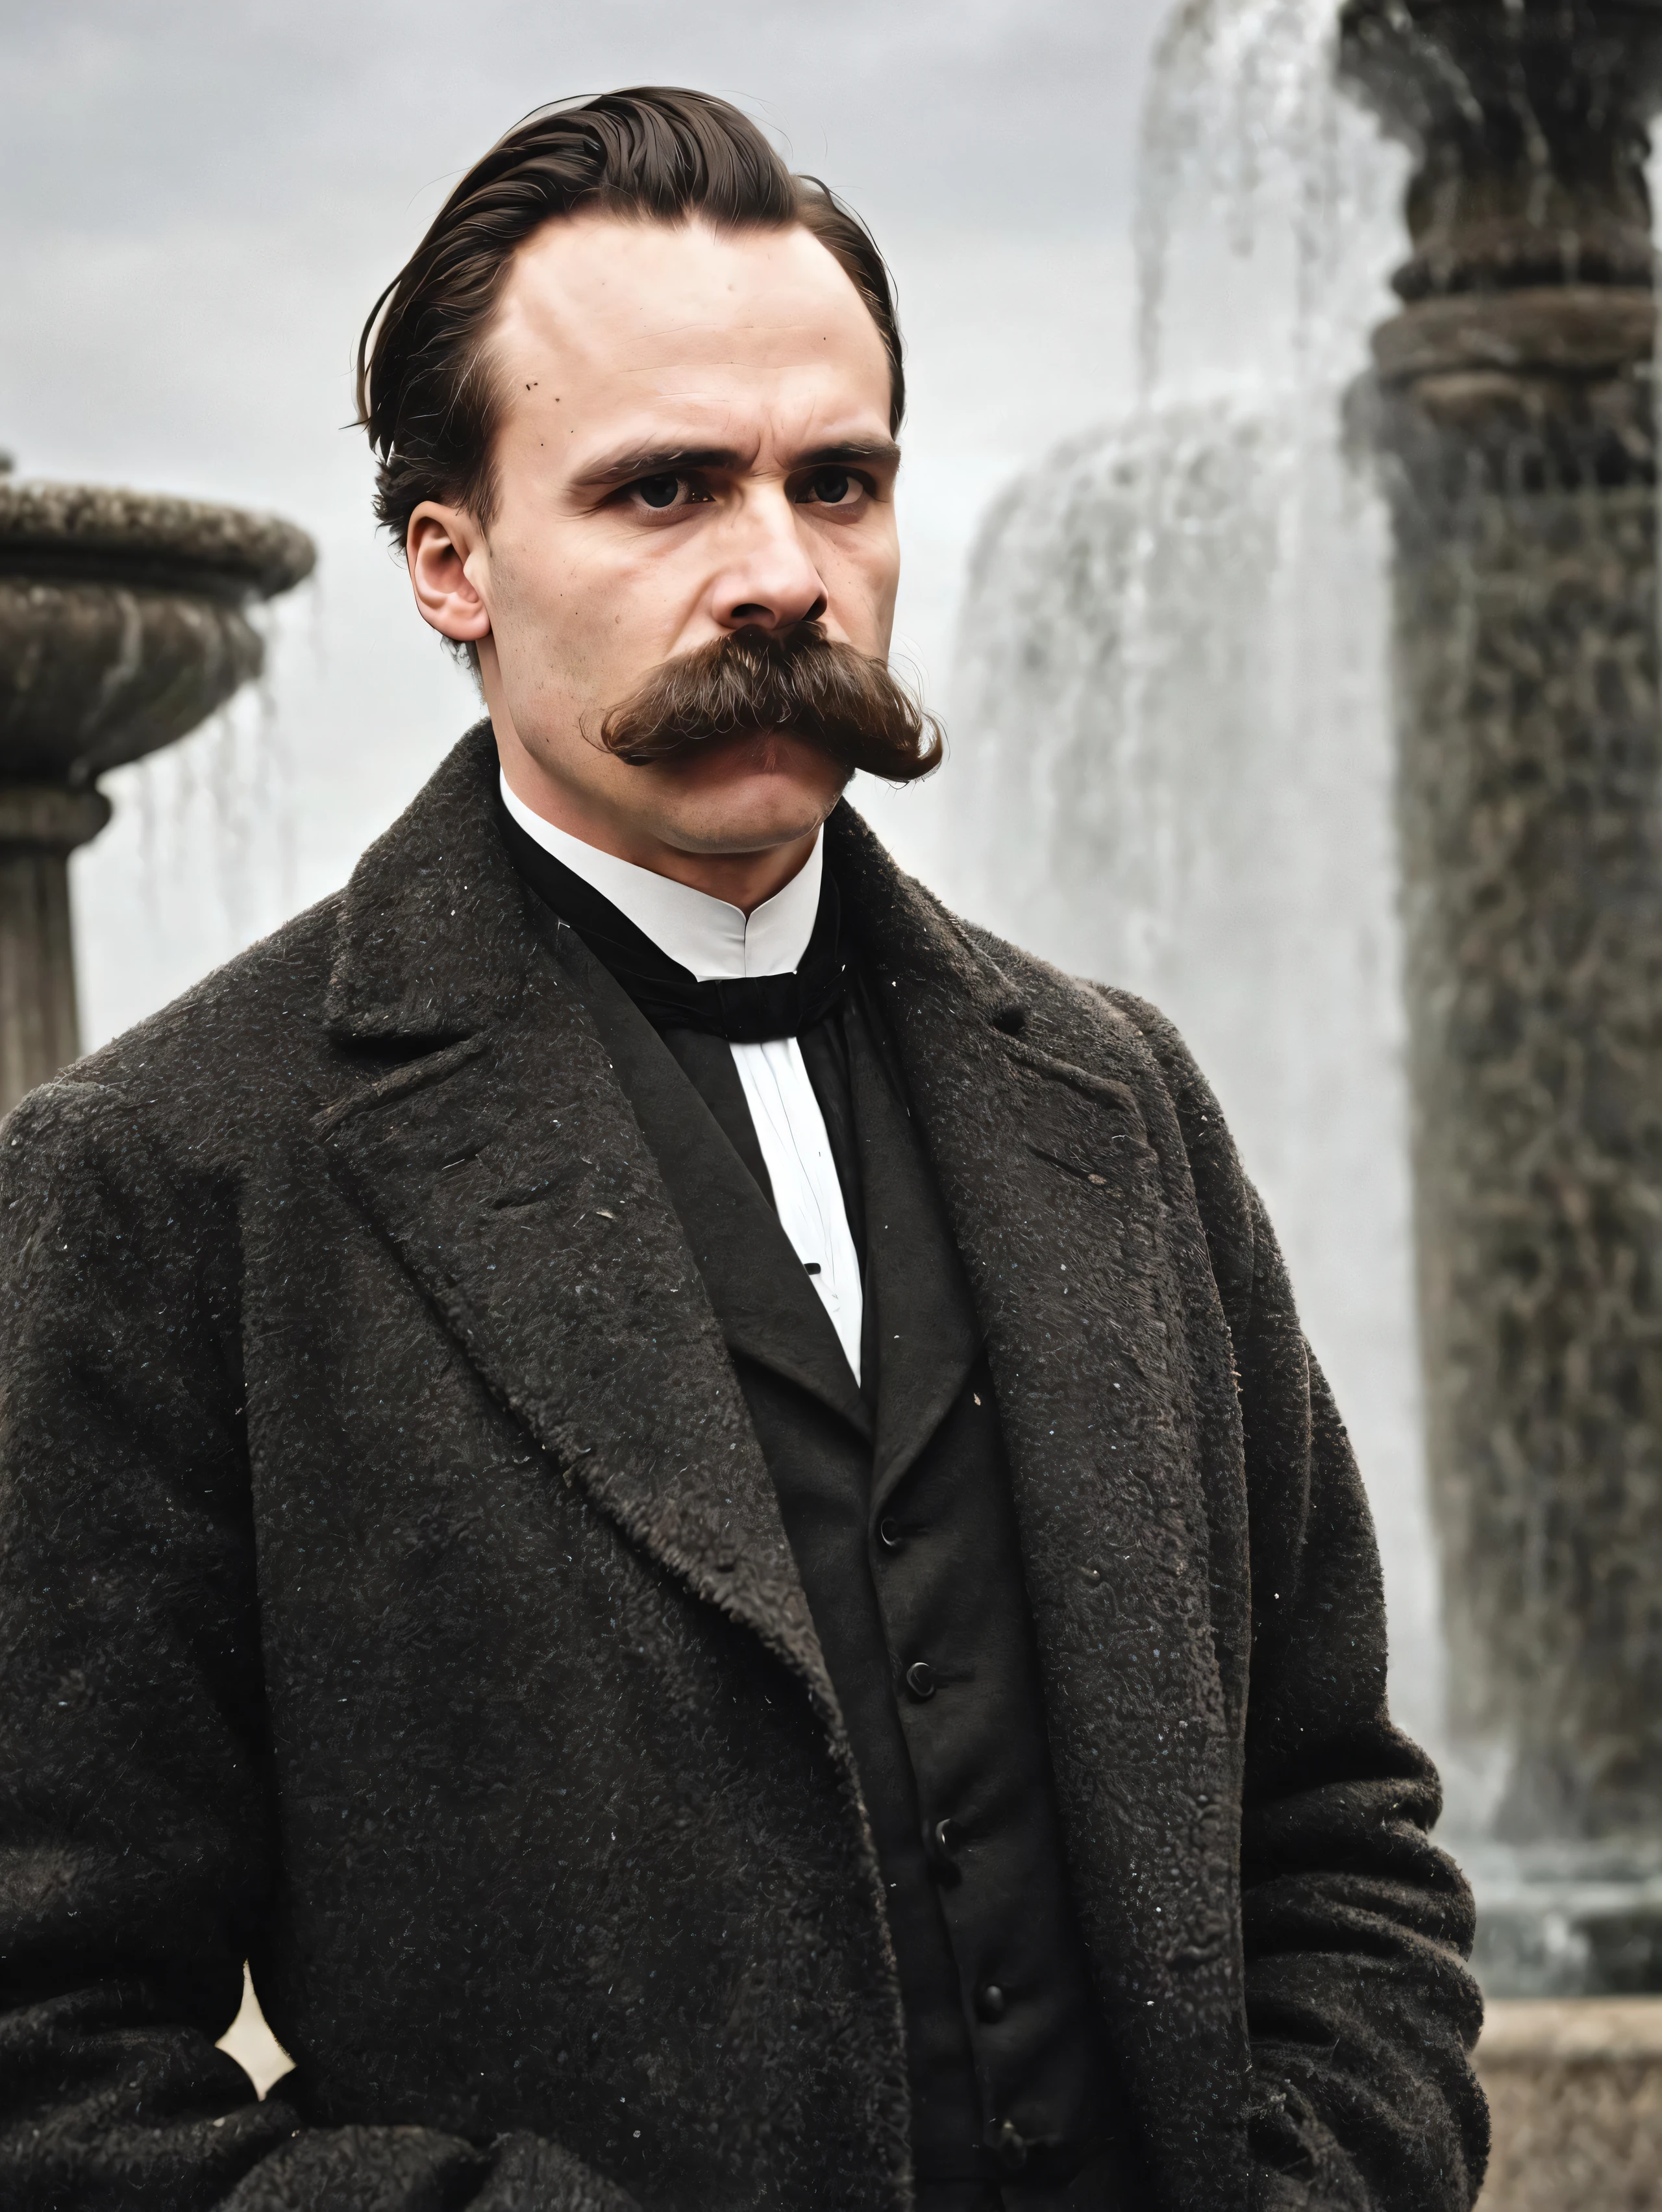 friedrichnietzsche, thick moustache, forehead, coat, white shirt, (standing by the fountain:1.1), (intricate details:0.9), (hdr, hyperdetailed:1.2), (natural skin texture, hyperrealism, soft light, sharp), (intricate details:0.9), (hdr, hyperdetailed:1.2), (natural skin texture, hyperrealism, soft light, sharp)